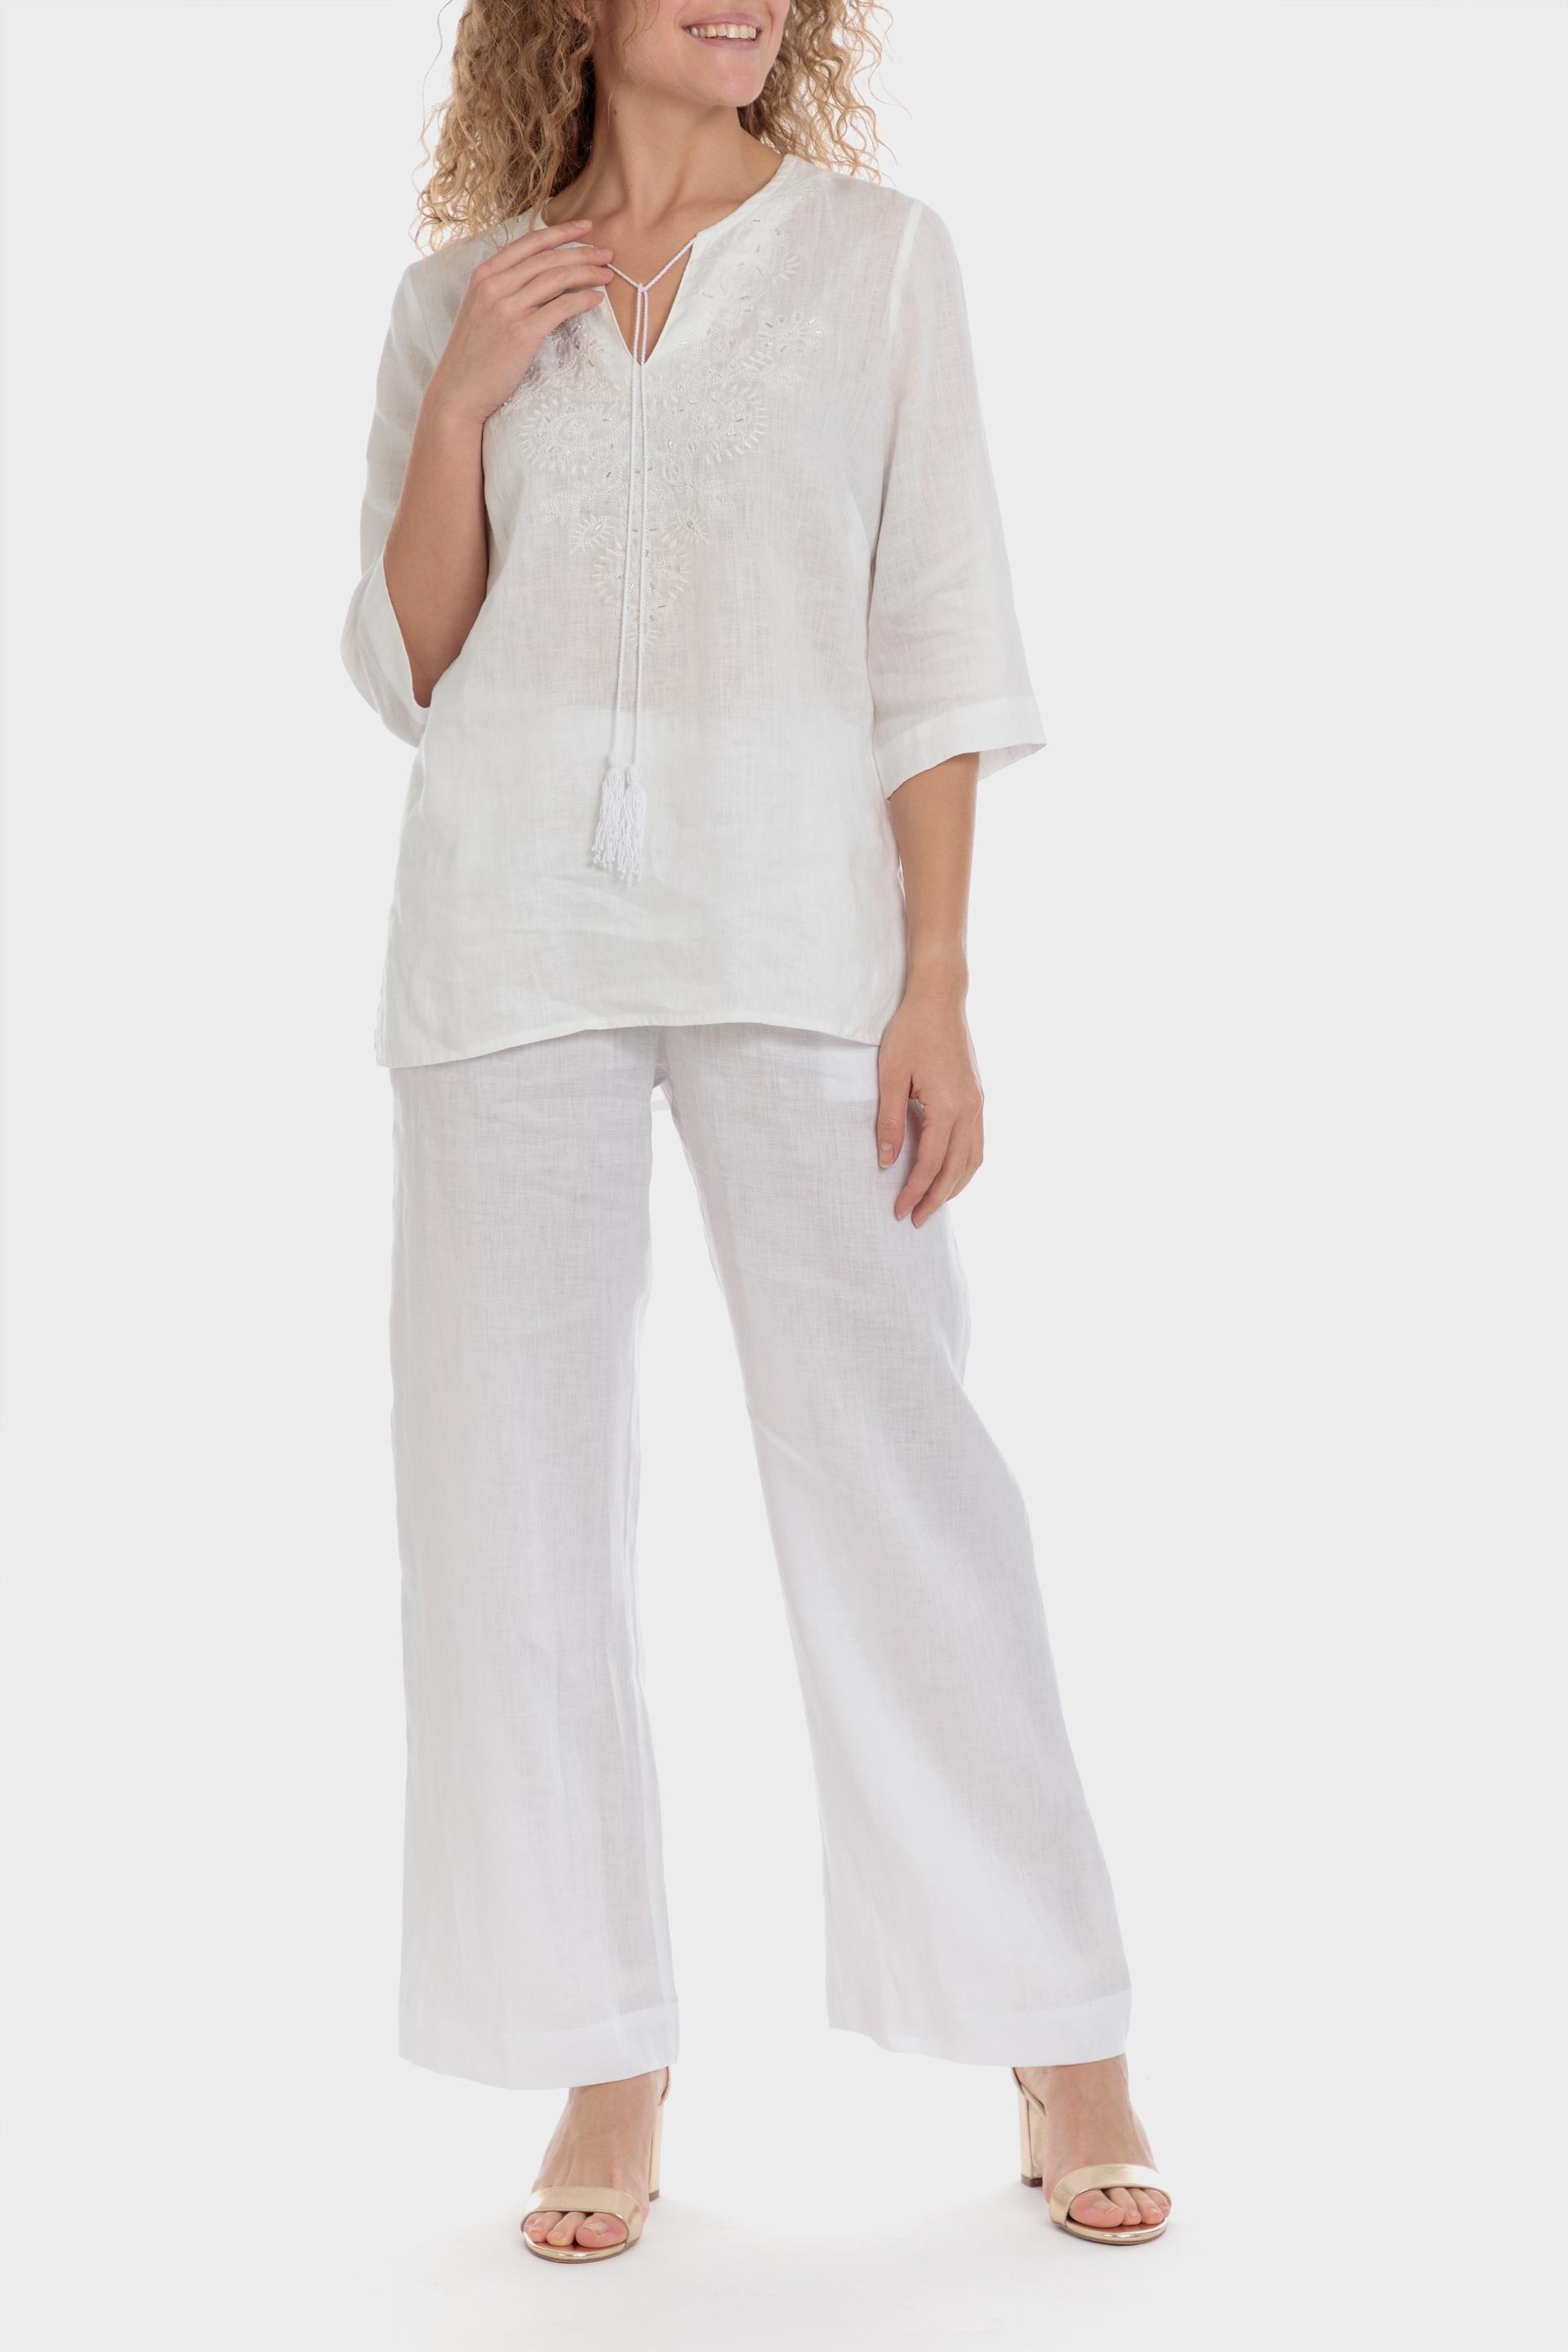 Punt Roma - White Embroidered Blouse